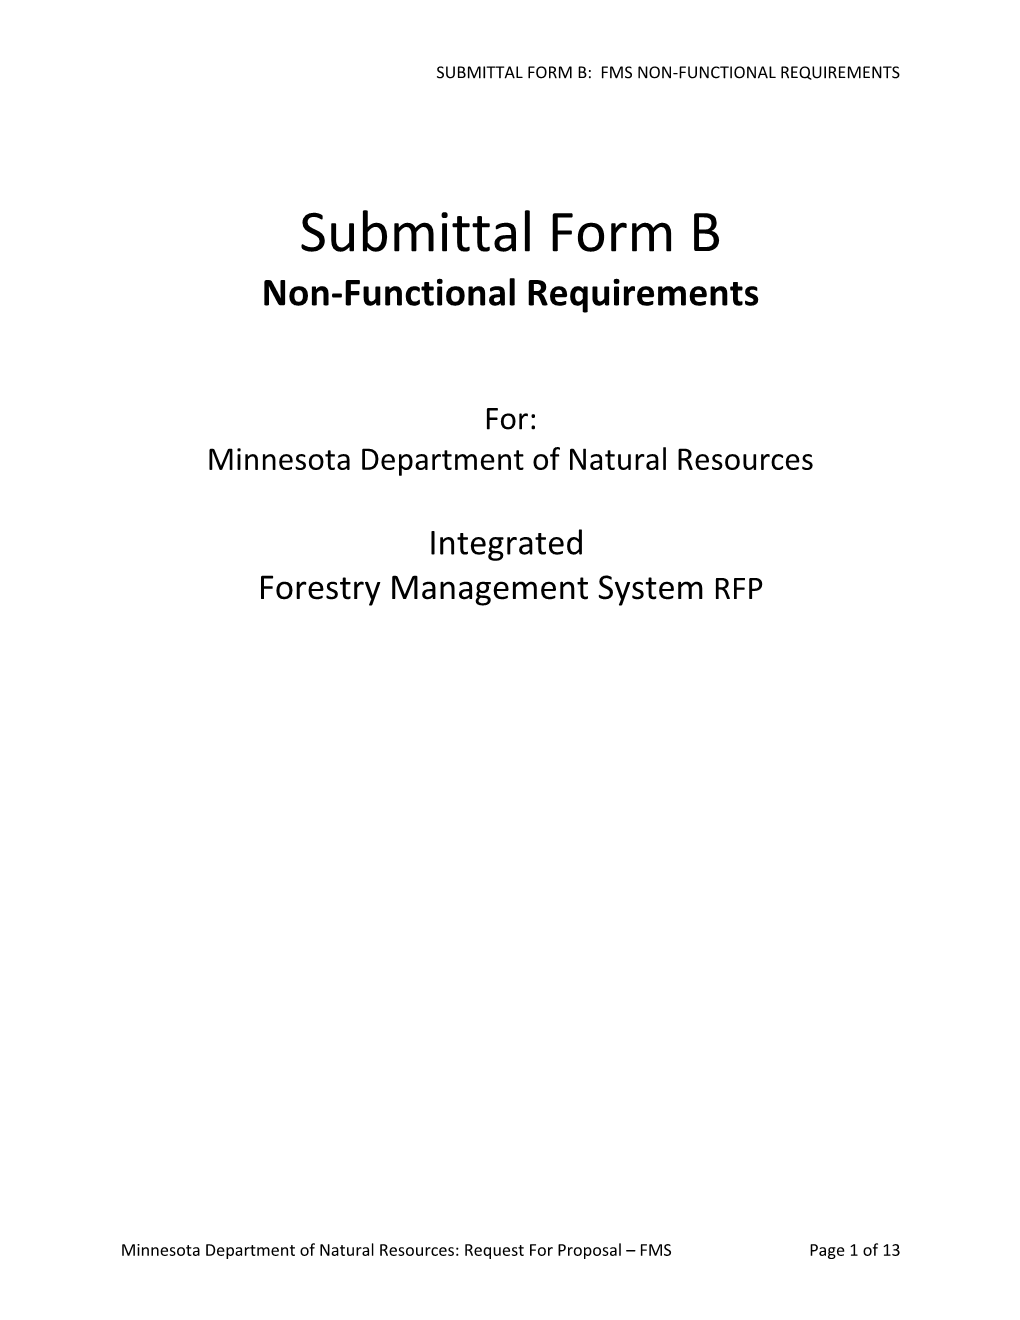 Submittal Form B Non-Functional Requirements